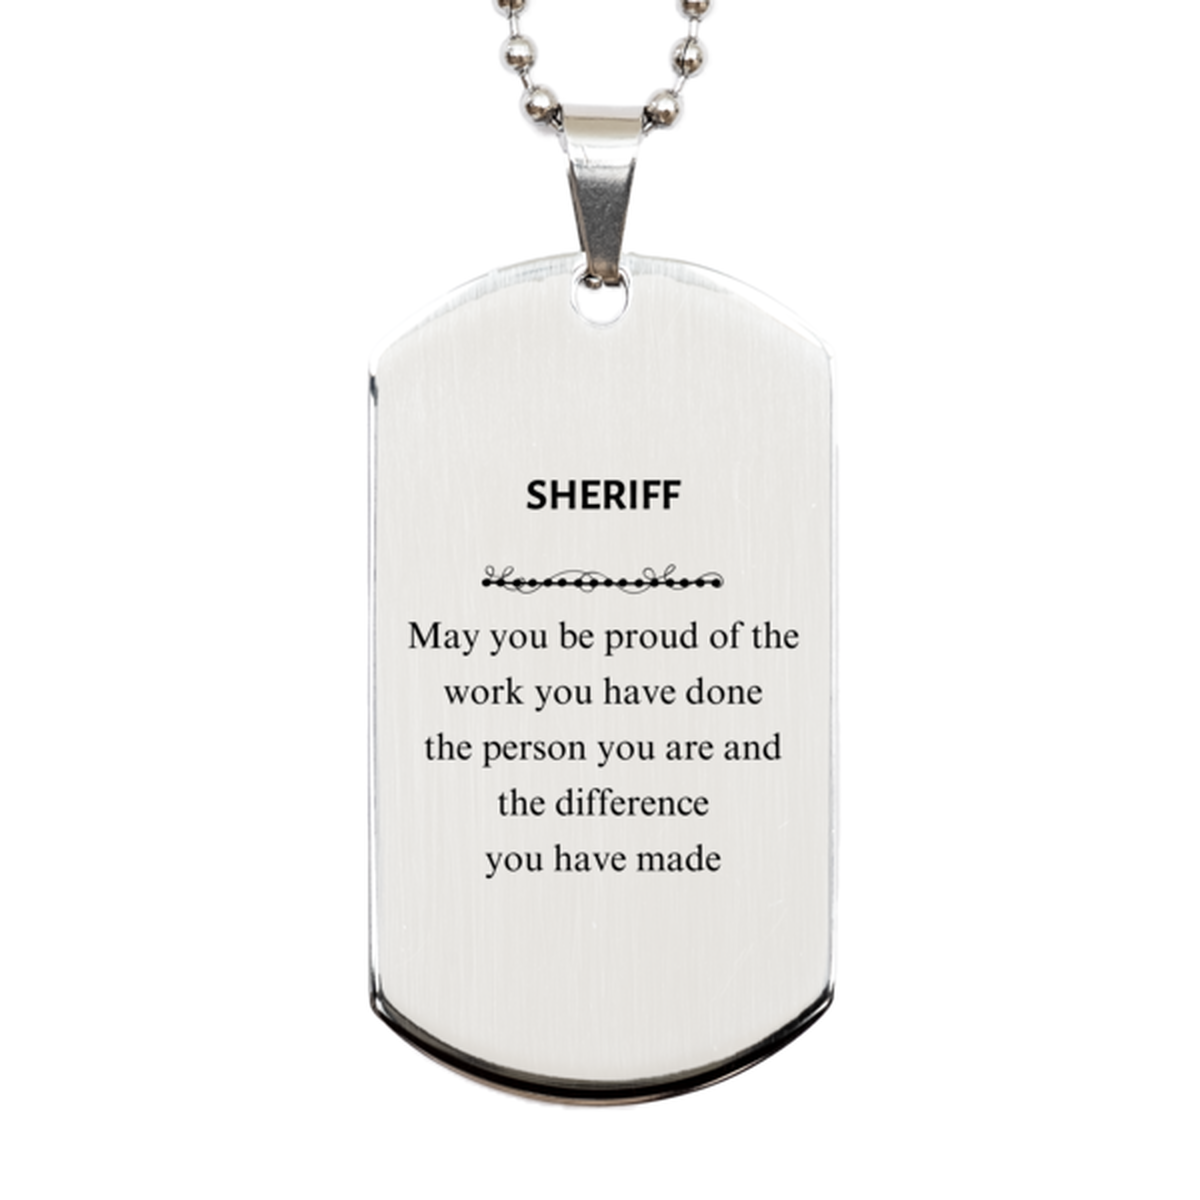 Sheriff May you be proud of the work you have done, Retirement Sheriff Silver Dog Tag for Colleague Appreciation Gifts Amazing for Sheriff